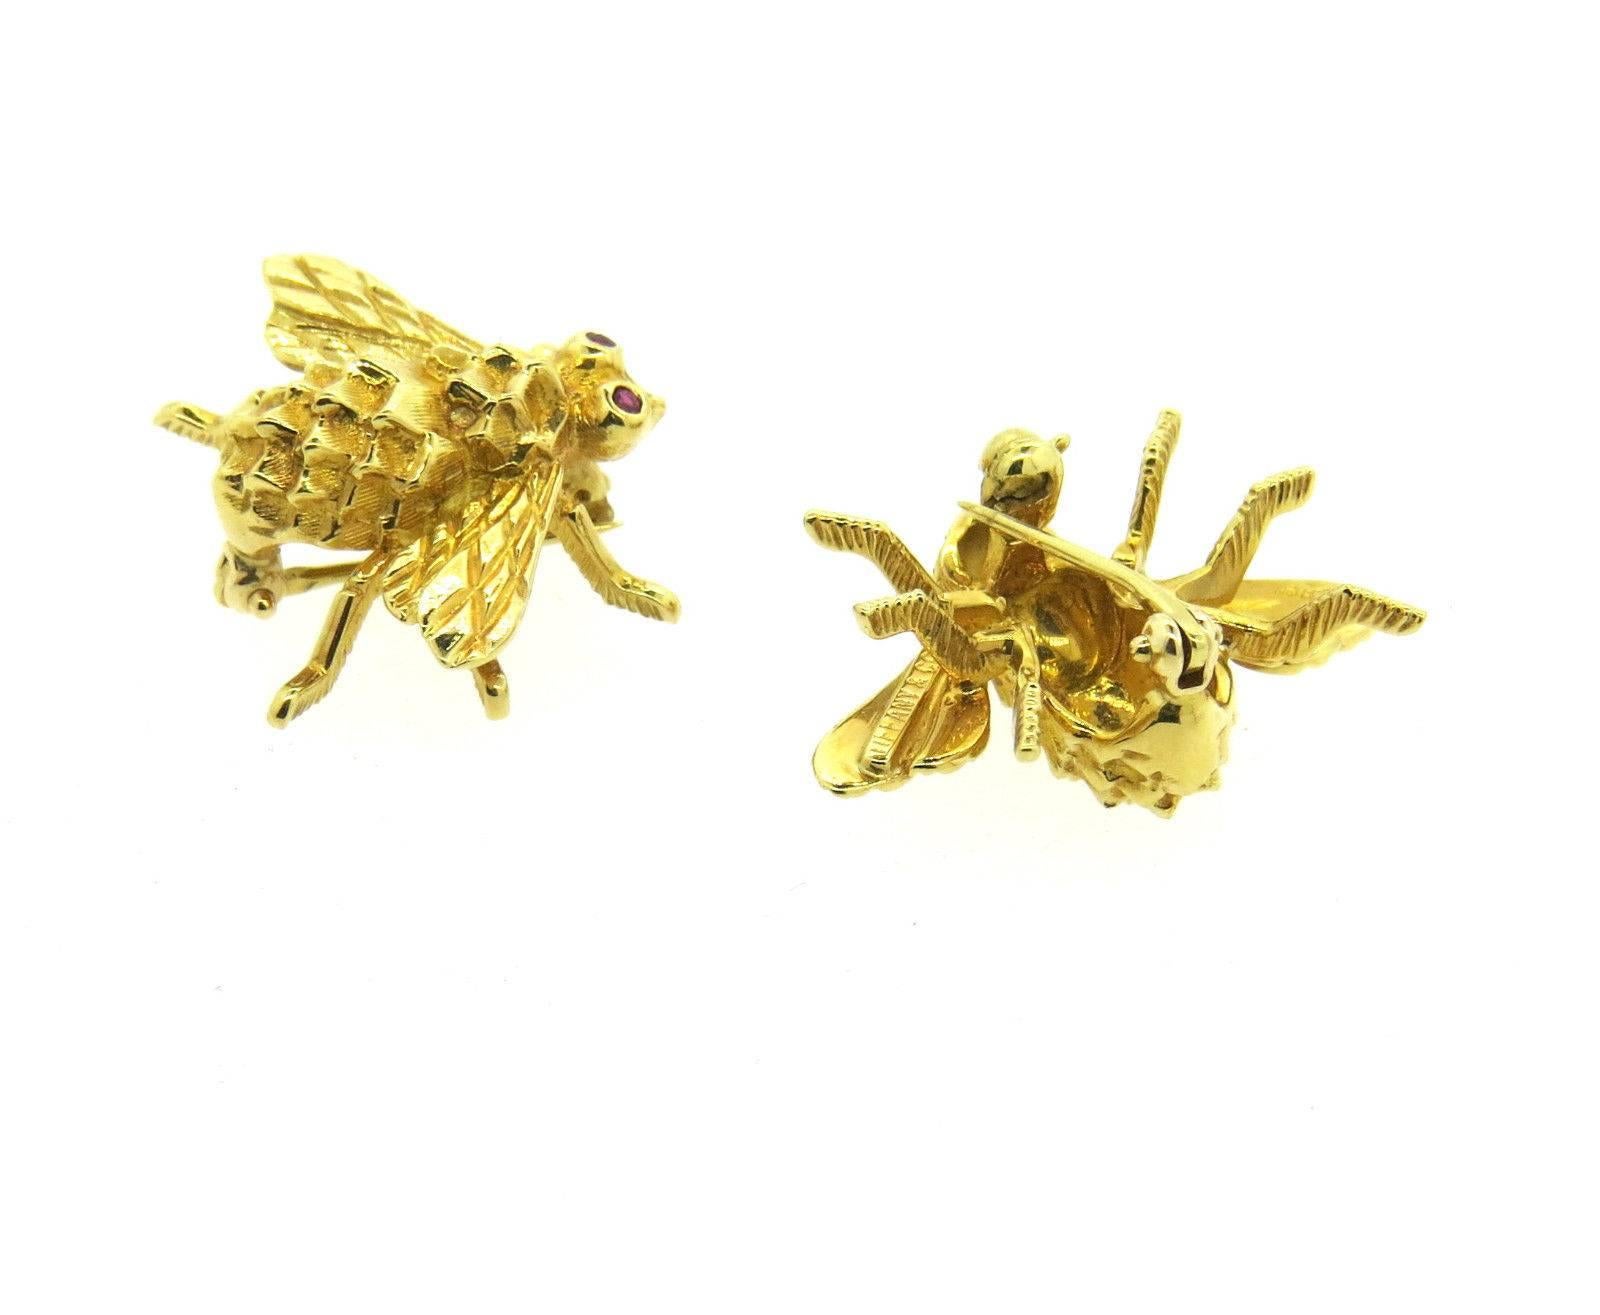 A pair of 18k yellow gold bumble bee brooch pins with ruby eyes.  Crafted by Tiffany & Co, each pin measures 18mm x 25mm.  The total weight of both pins is 10 grams.  Marked: 18Kt, Tiffany & Co 
